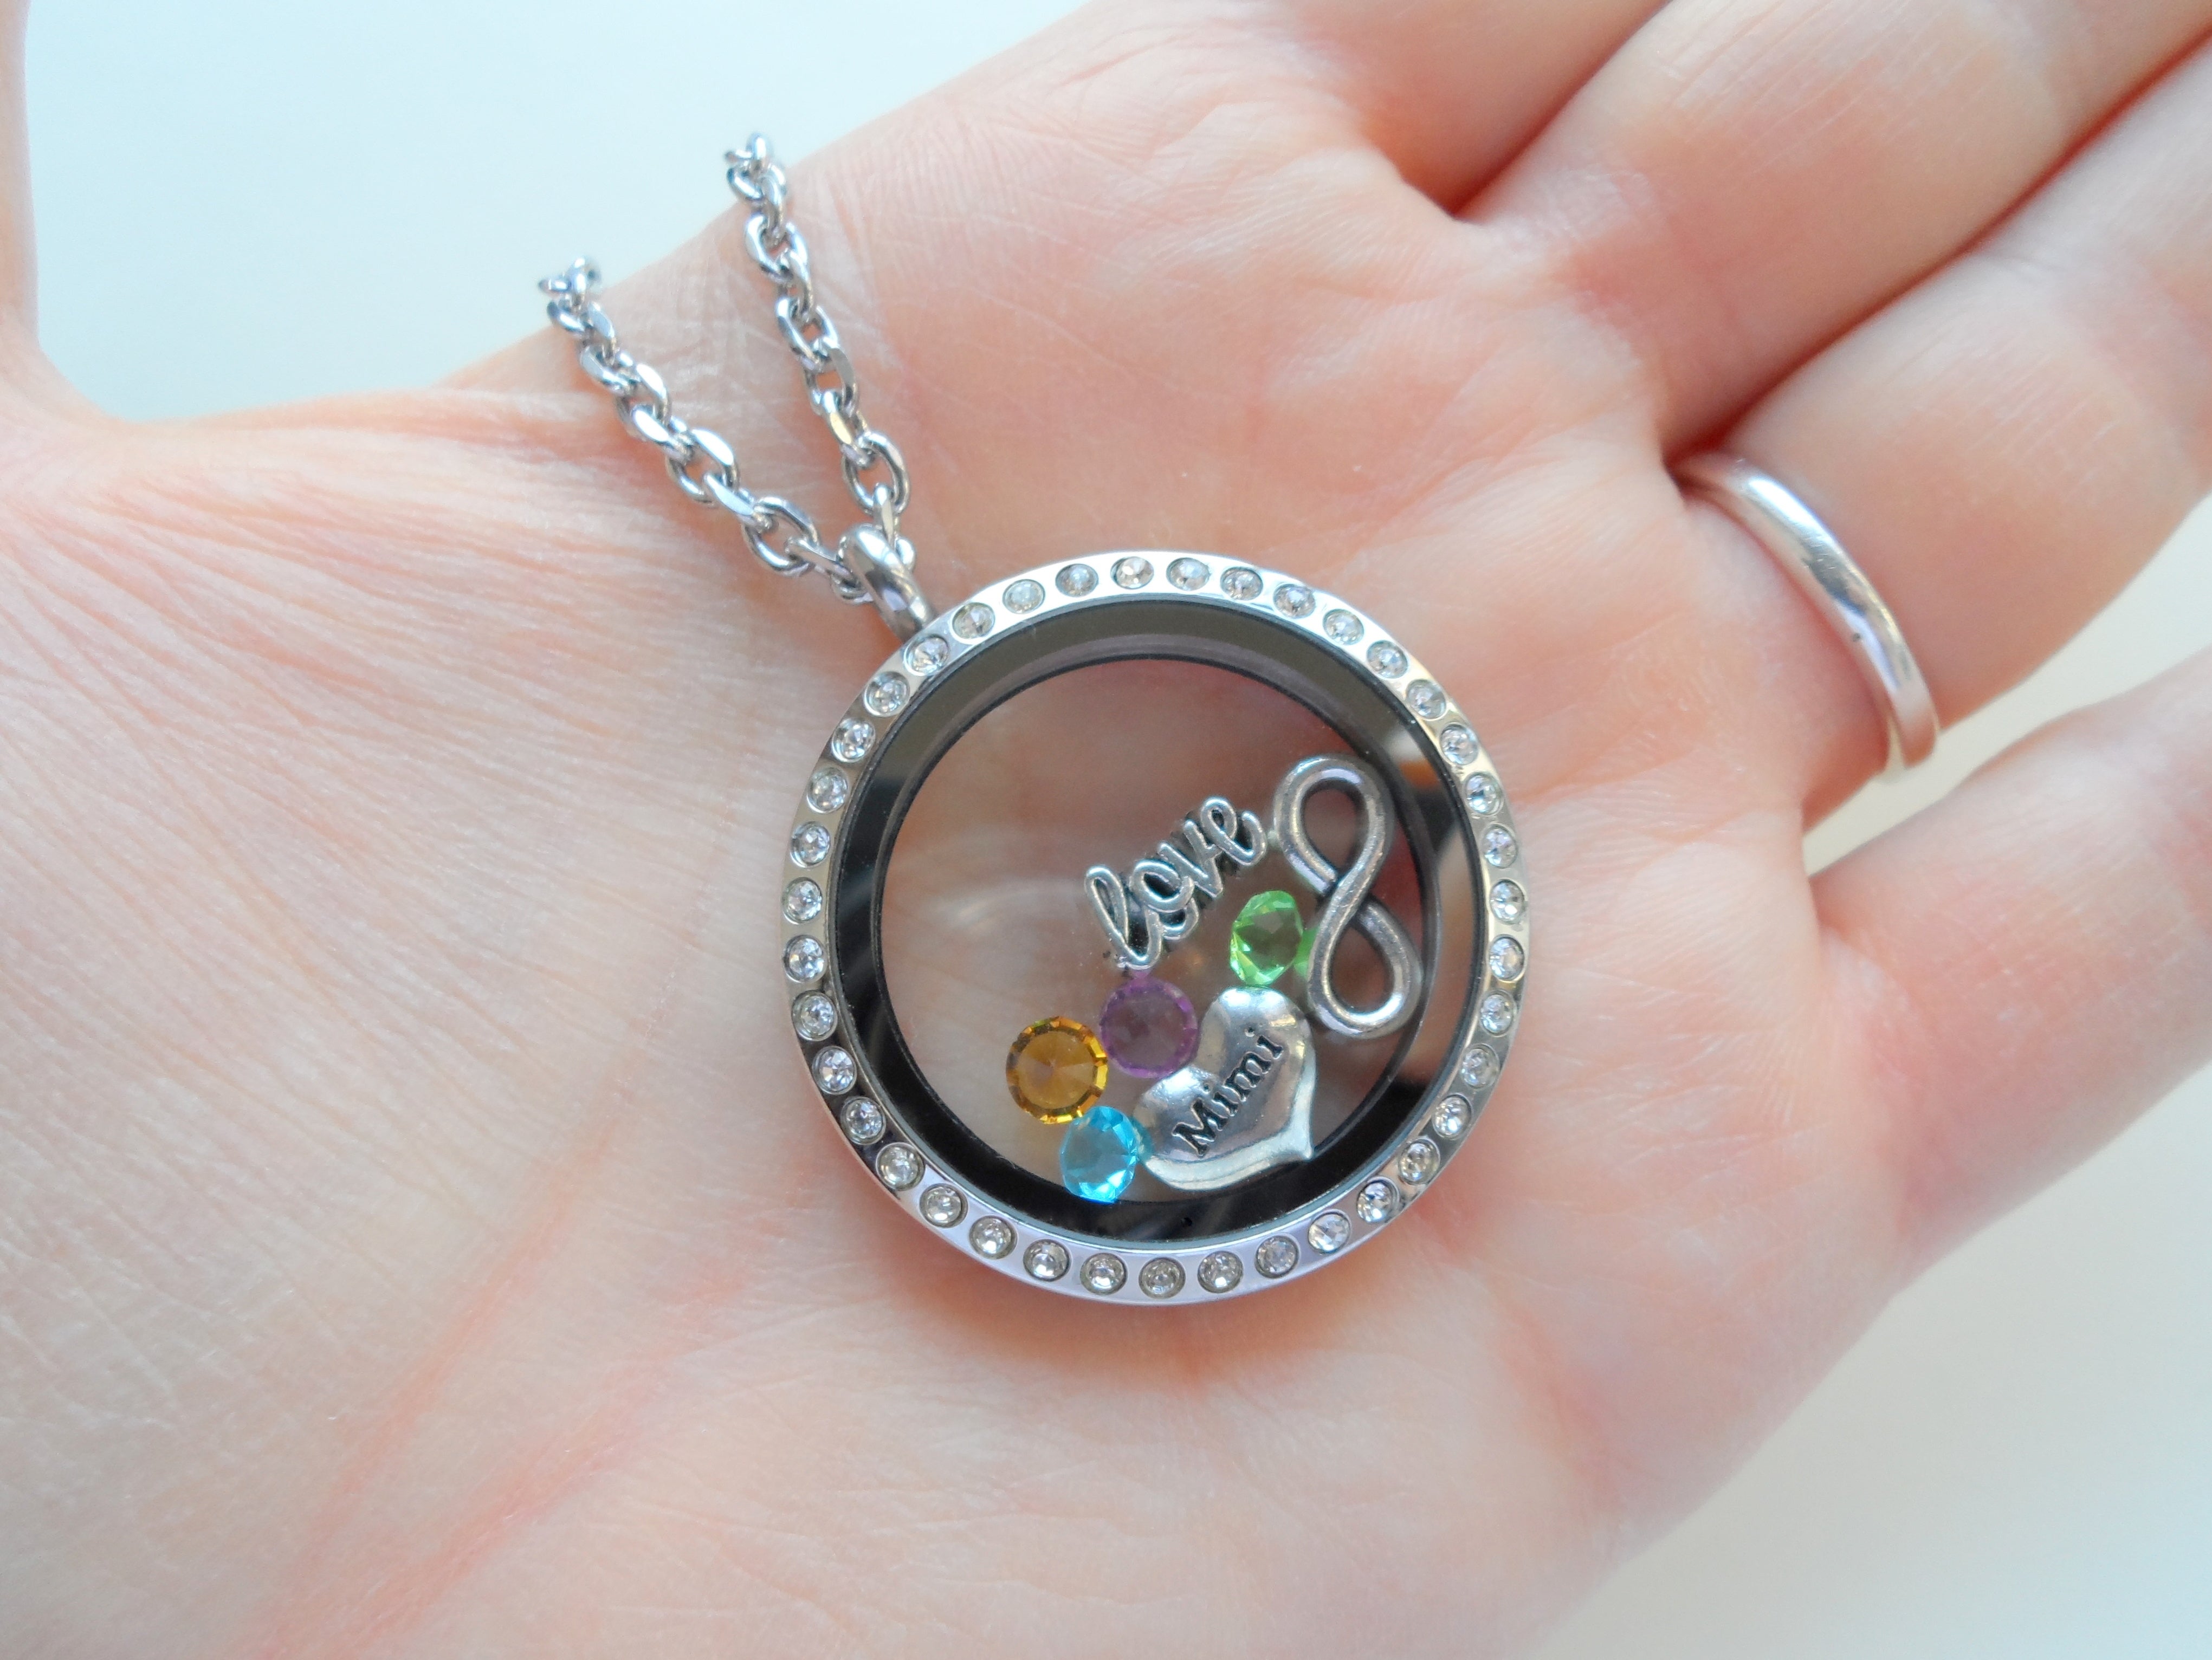 Personalized Floating Locket Necklace for Mother or Grandma • by JE